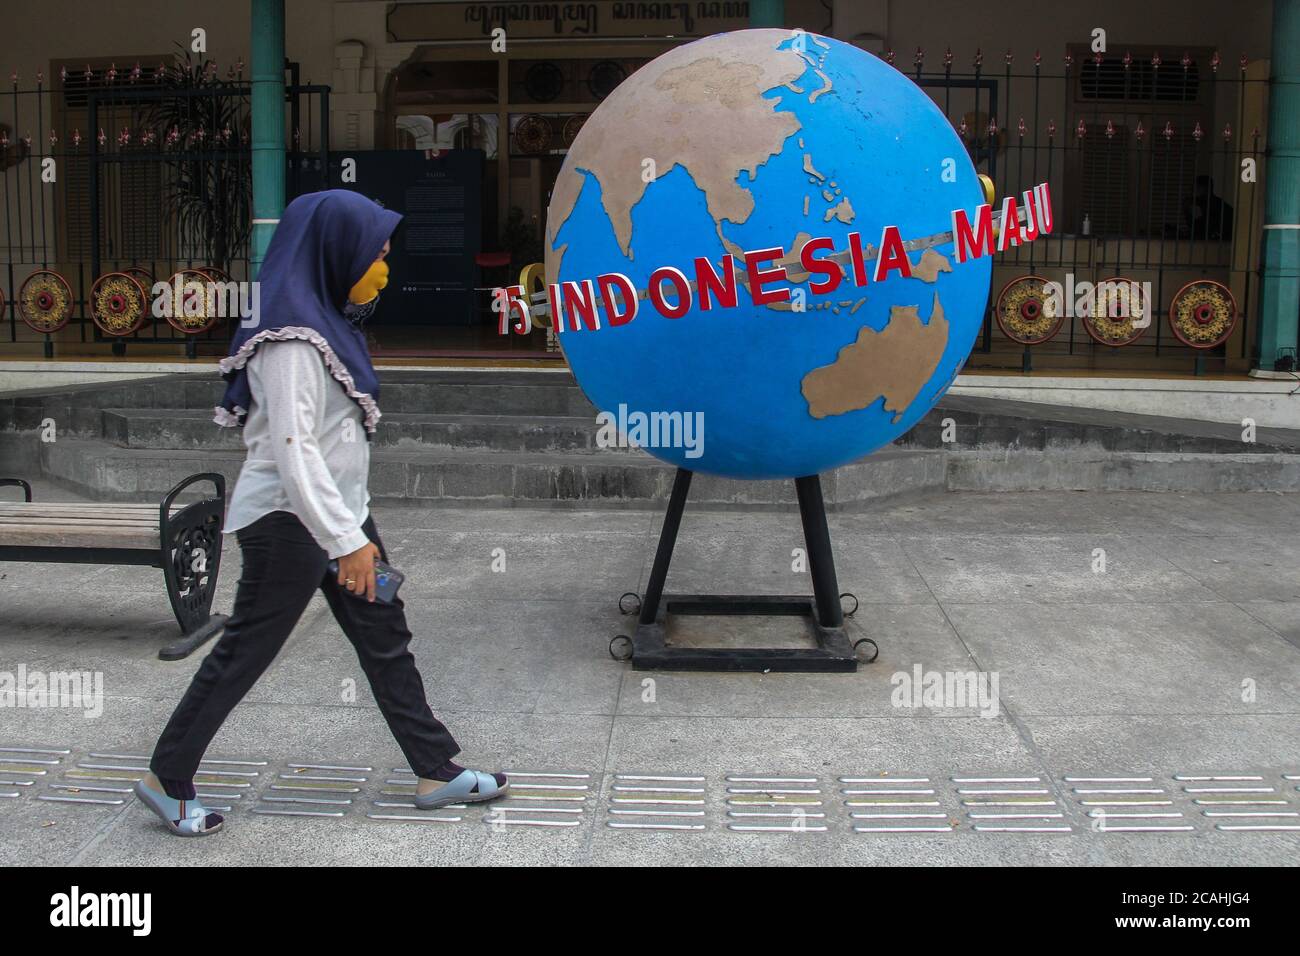 Yogyakarta, YOGYAKARTA SPECIAL REGION, INDONESIA. 7th Aug, 2020. A woman wearing a mask to protect herself from the corona virus outbreak crosses the globe that reads 75 years of Indonesian Independence in Yogyakarta, Indonesia. Friday, 7 August 2020. Minister of Finance of Indonesia, Sri Mulyani Indrawati said, the Corona Virus pandemic has hit all economic sectors. At present, only economic activity that switches to digital online can survive the challenges. Credit: Slamet Riyadi/ZUMA Wire/Alamy Live News Stock Photo